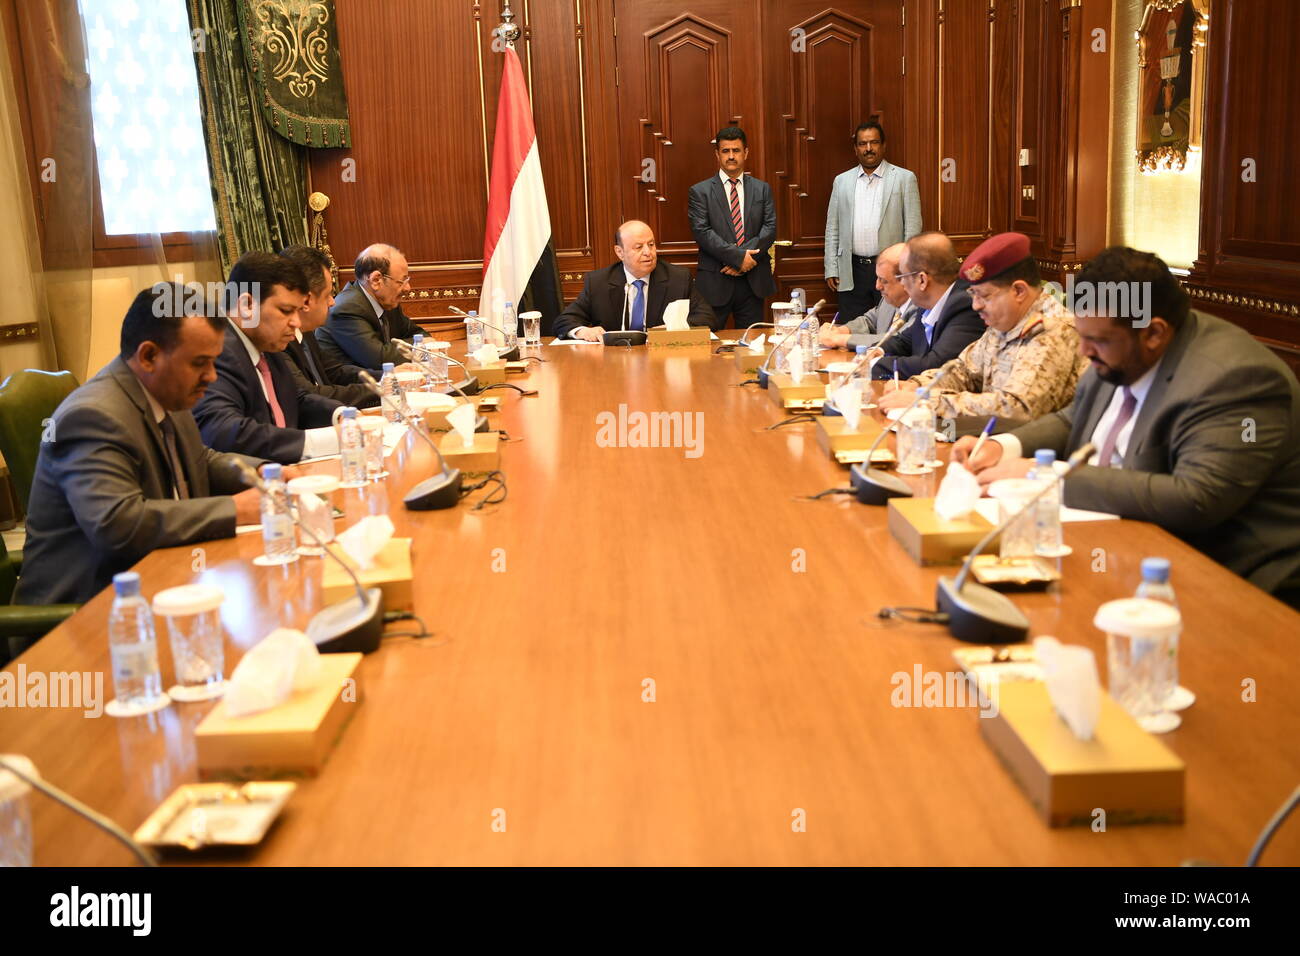 Riyadh. 20th Aug, 2019. Yemen's internationally-backed President Abdu-Rabbu Mansour Hadi (C) chairs a meeting of the country's high-ranking officials in Saudi Arabia's capital of Riyadh, on Aug. 19, 2019, to discuss the situation in the southern port city of Aden. Credit: Xinhua/Alamy Live News Stock Photo